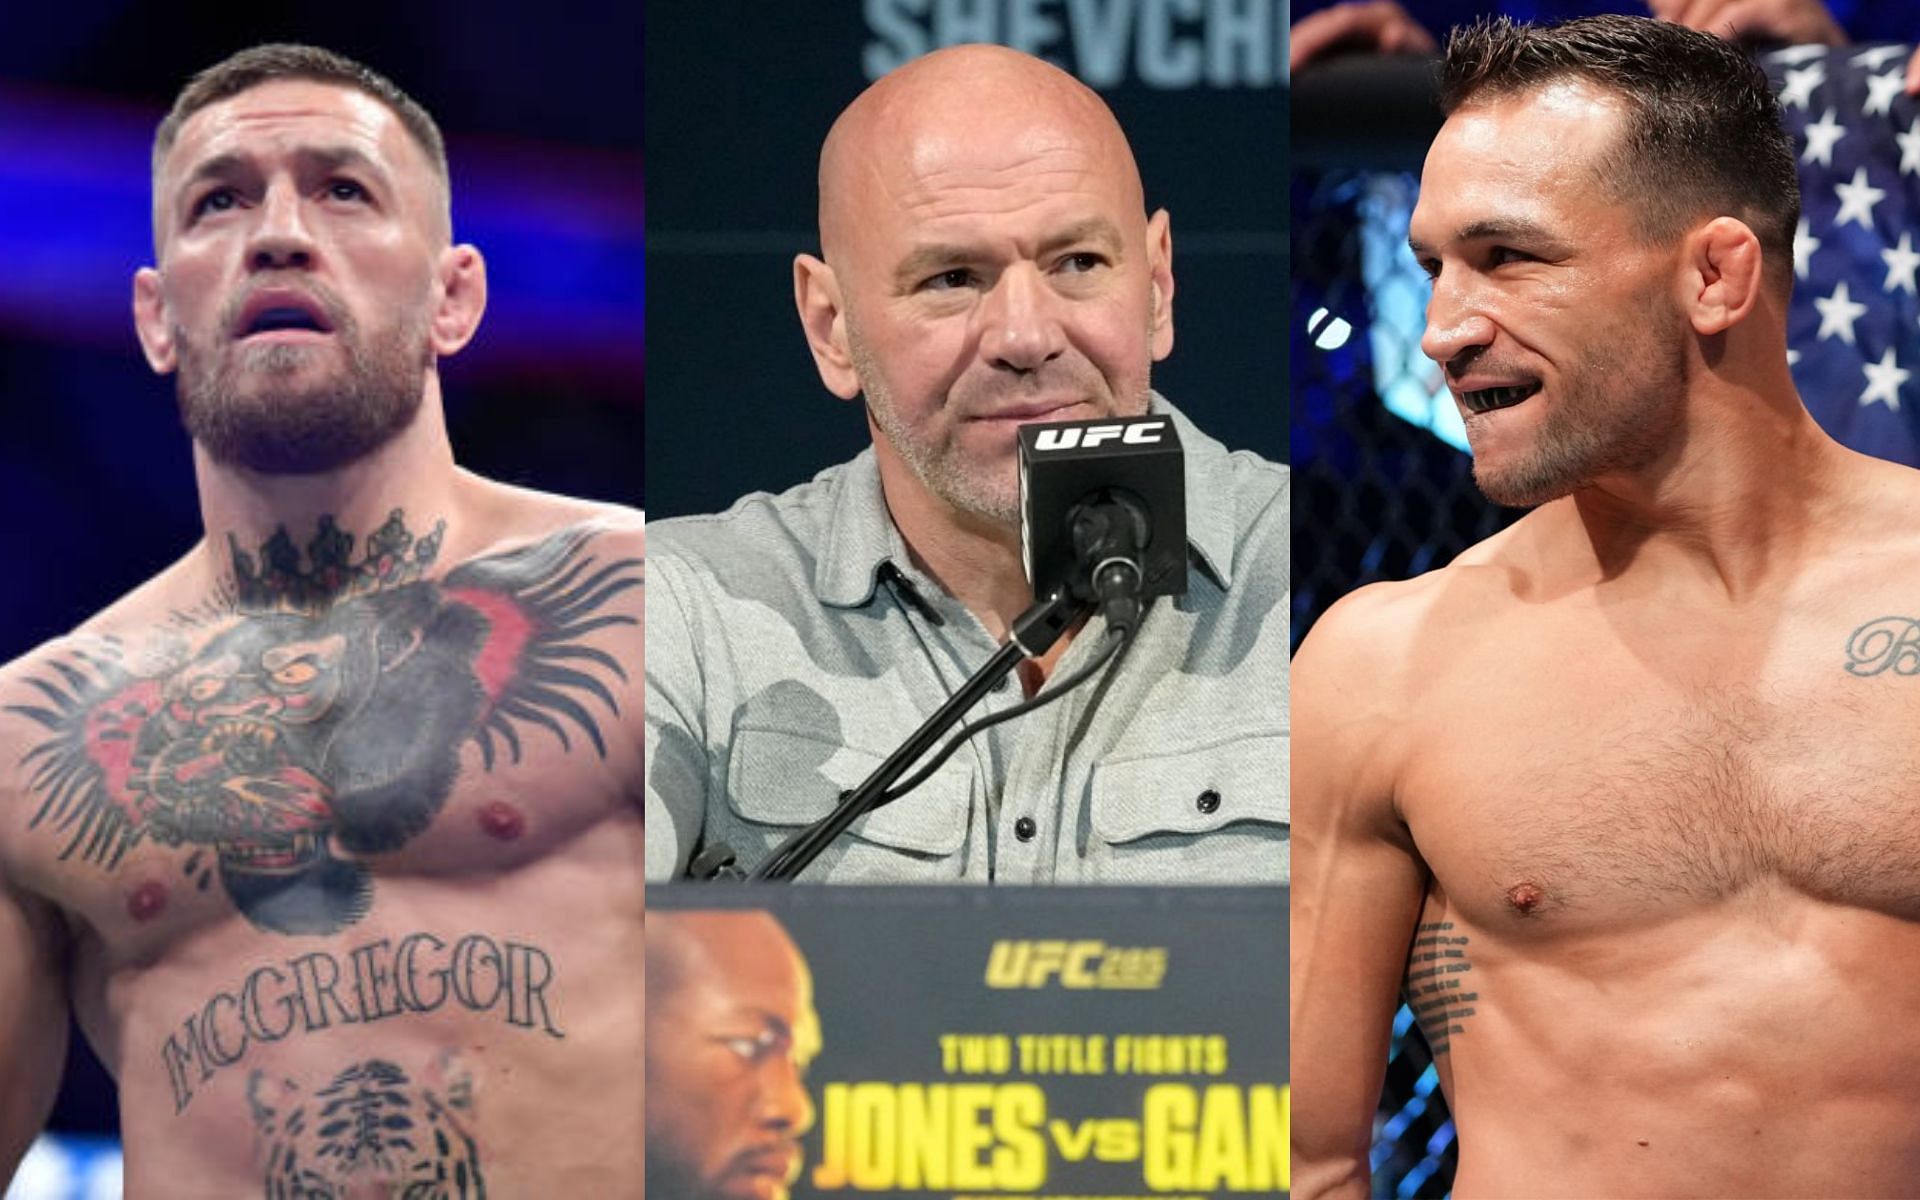 Dana White sheds light on TUF incident between Conor McGregor and Michael Chandler